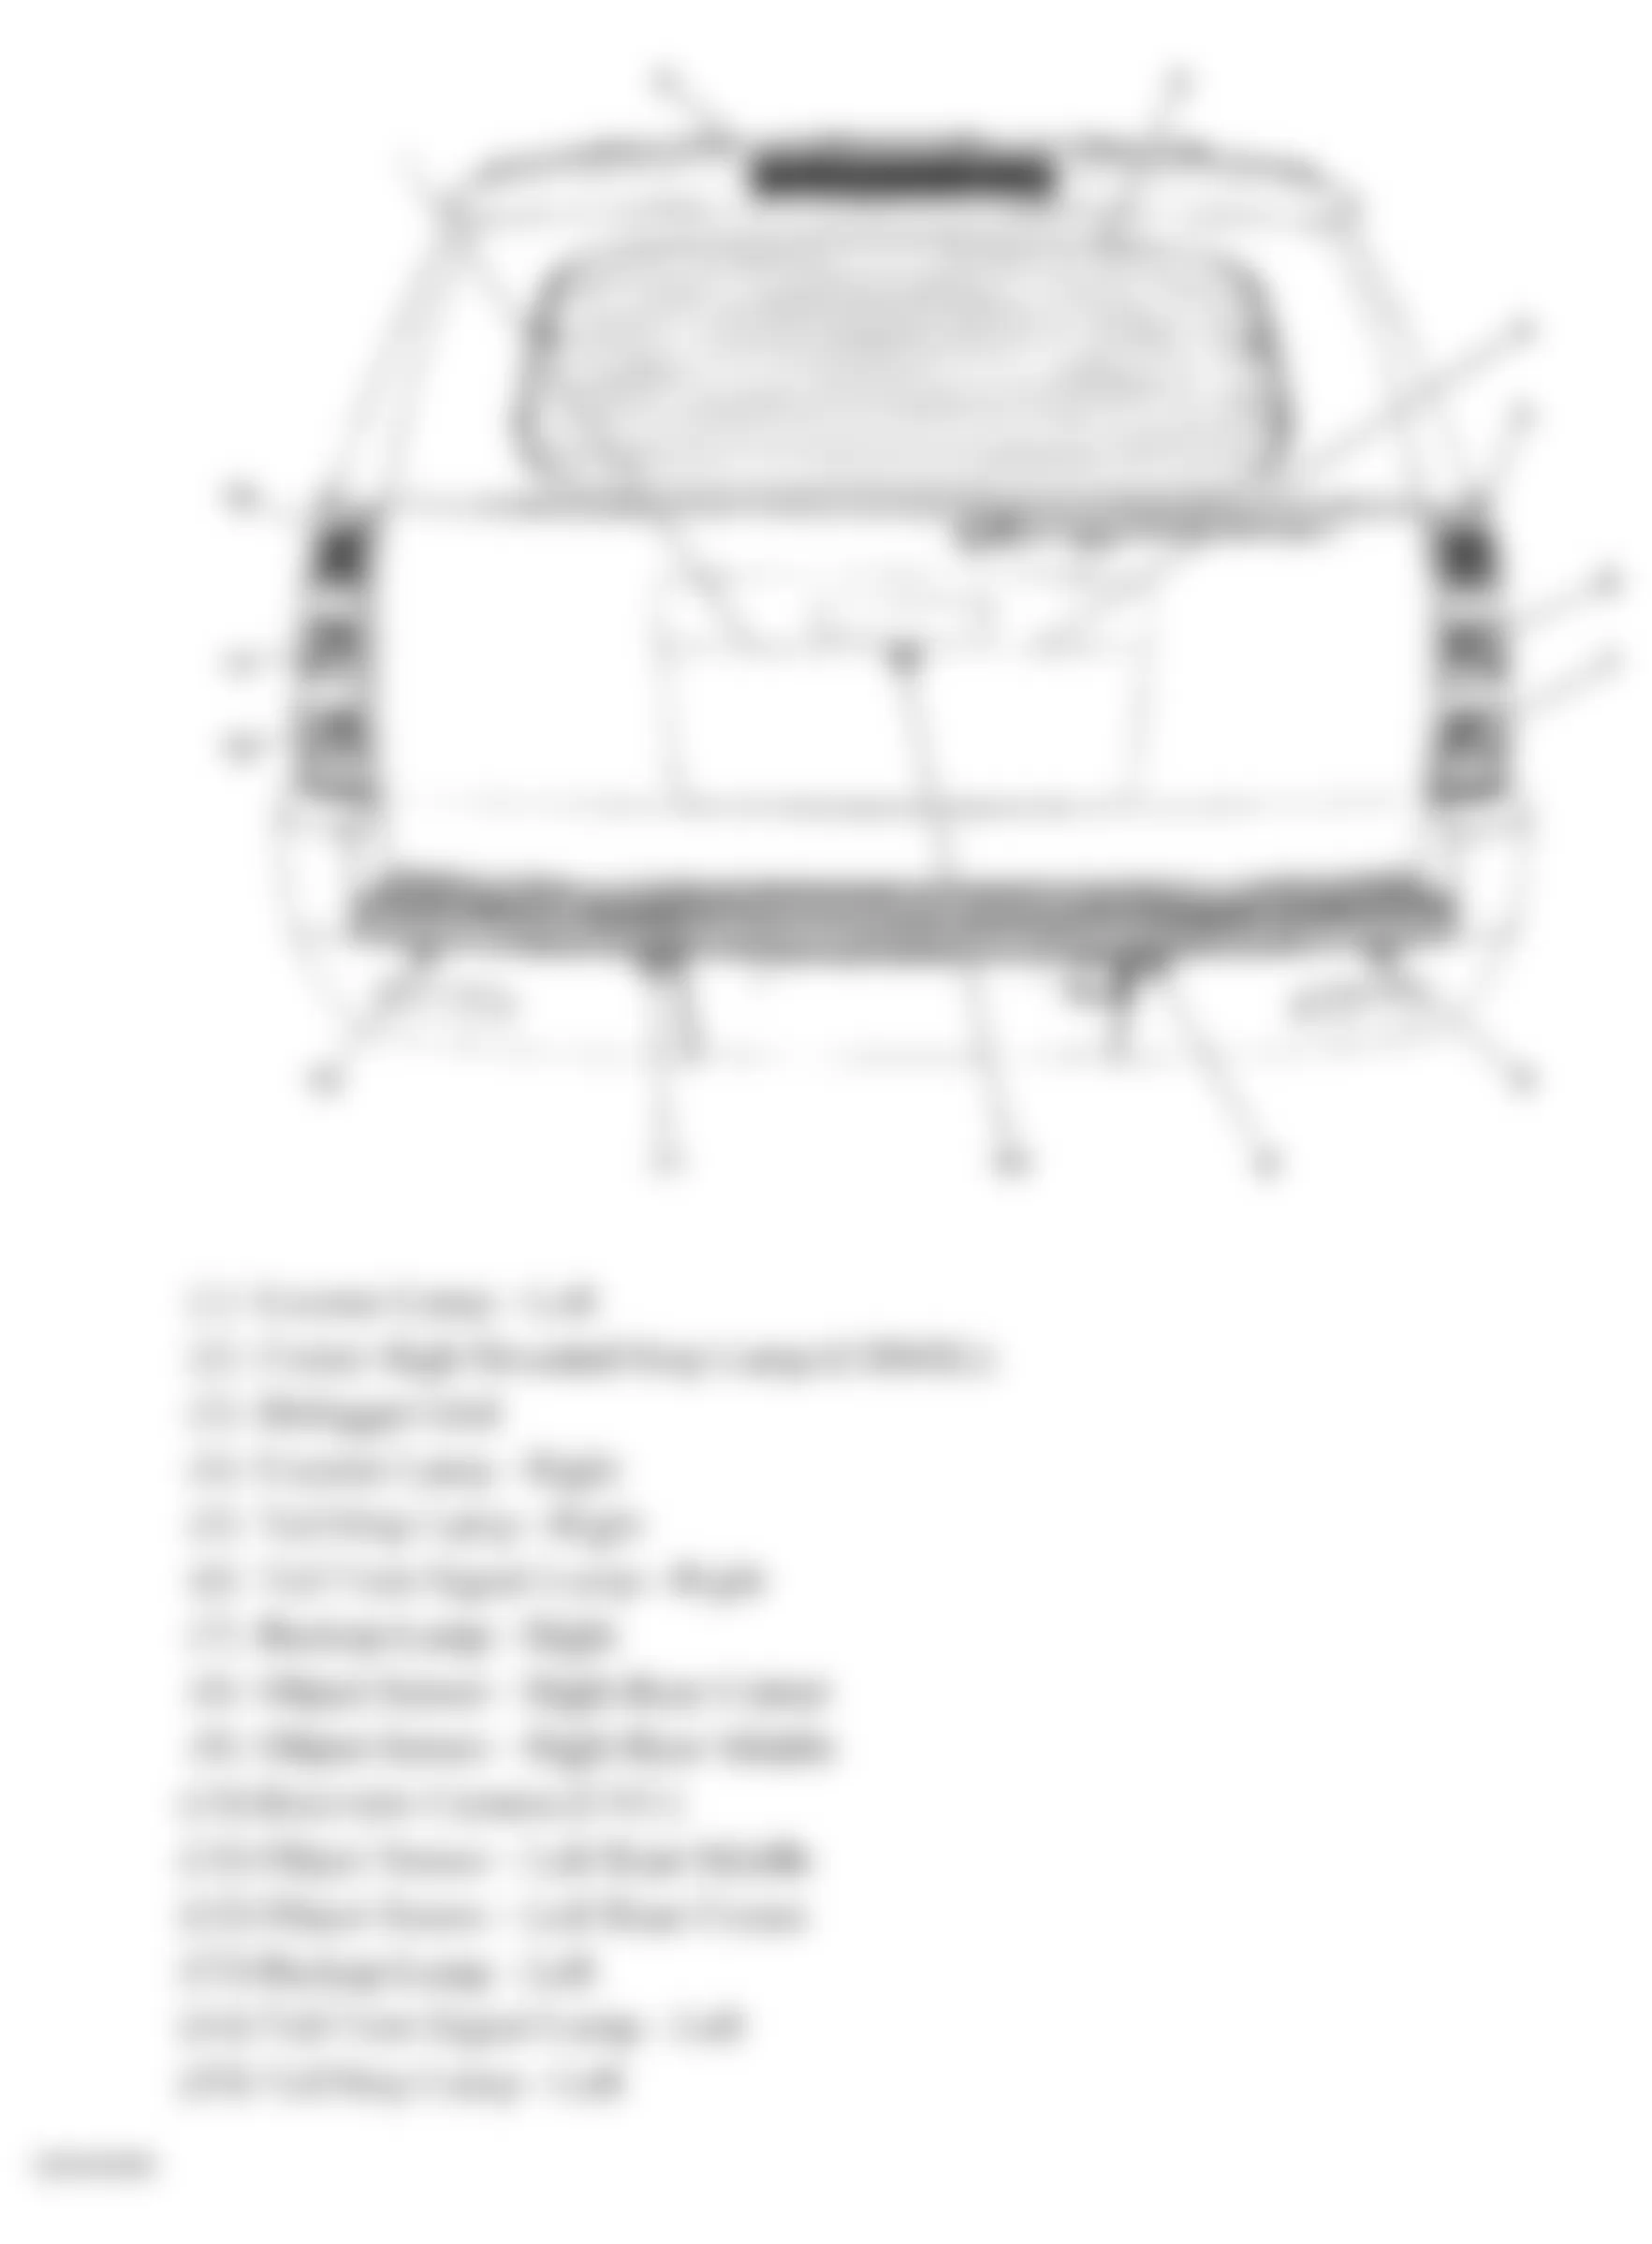 Chevrolet Suburban K1500 2010 - Component Locations -  Rear Of Vehicle (Yukon W/One Piece Liftgate)